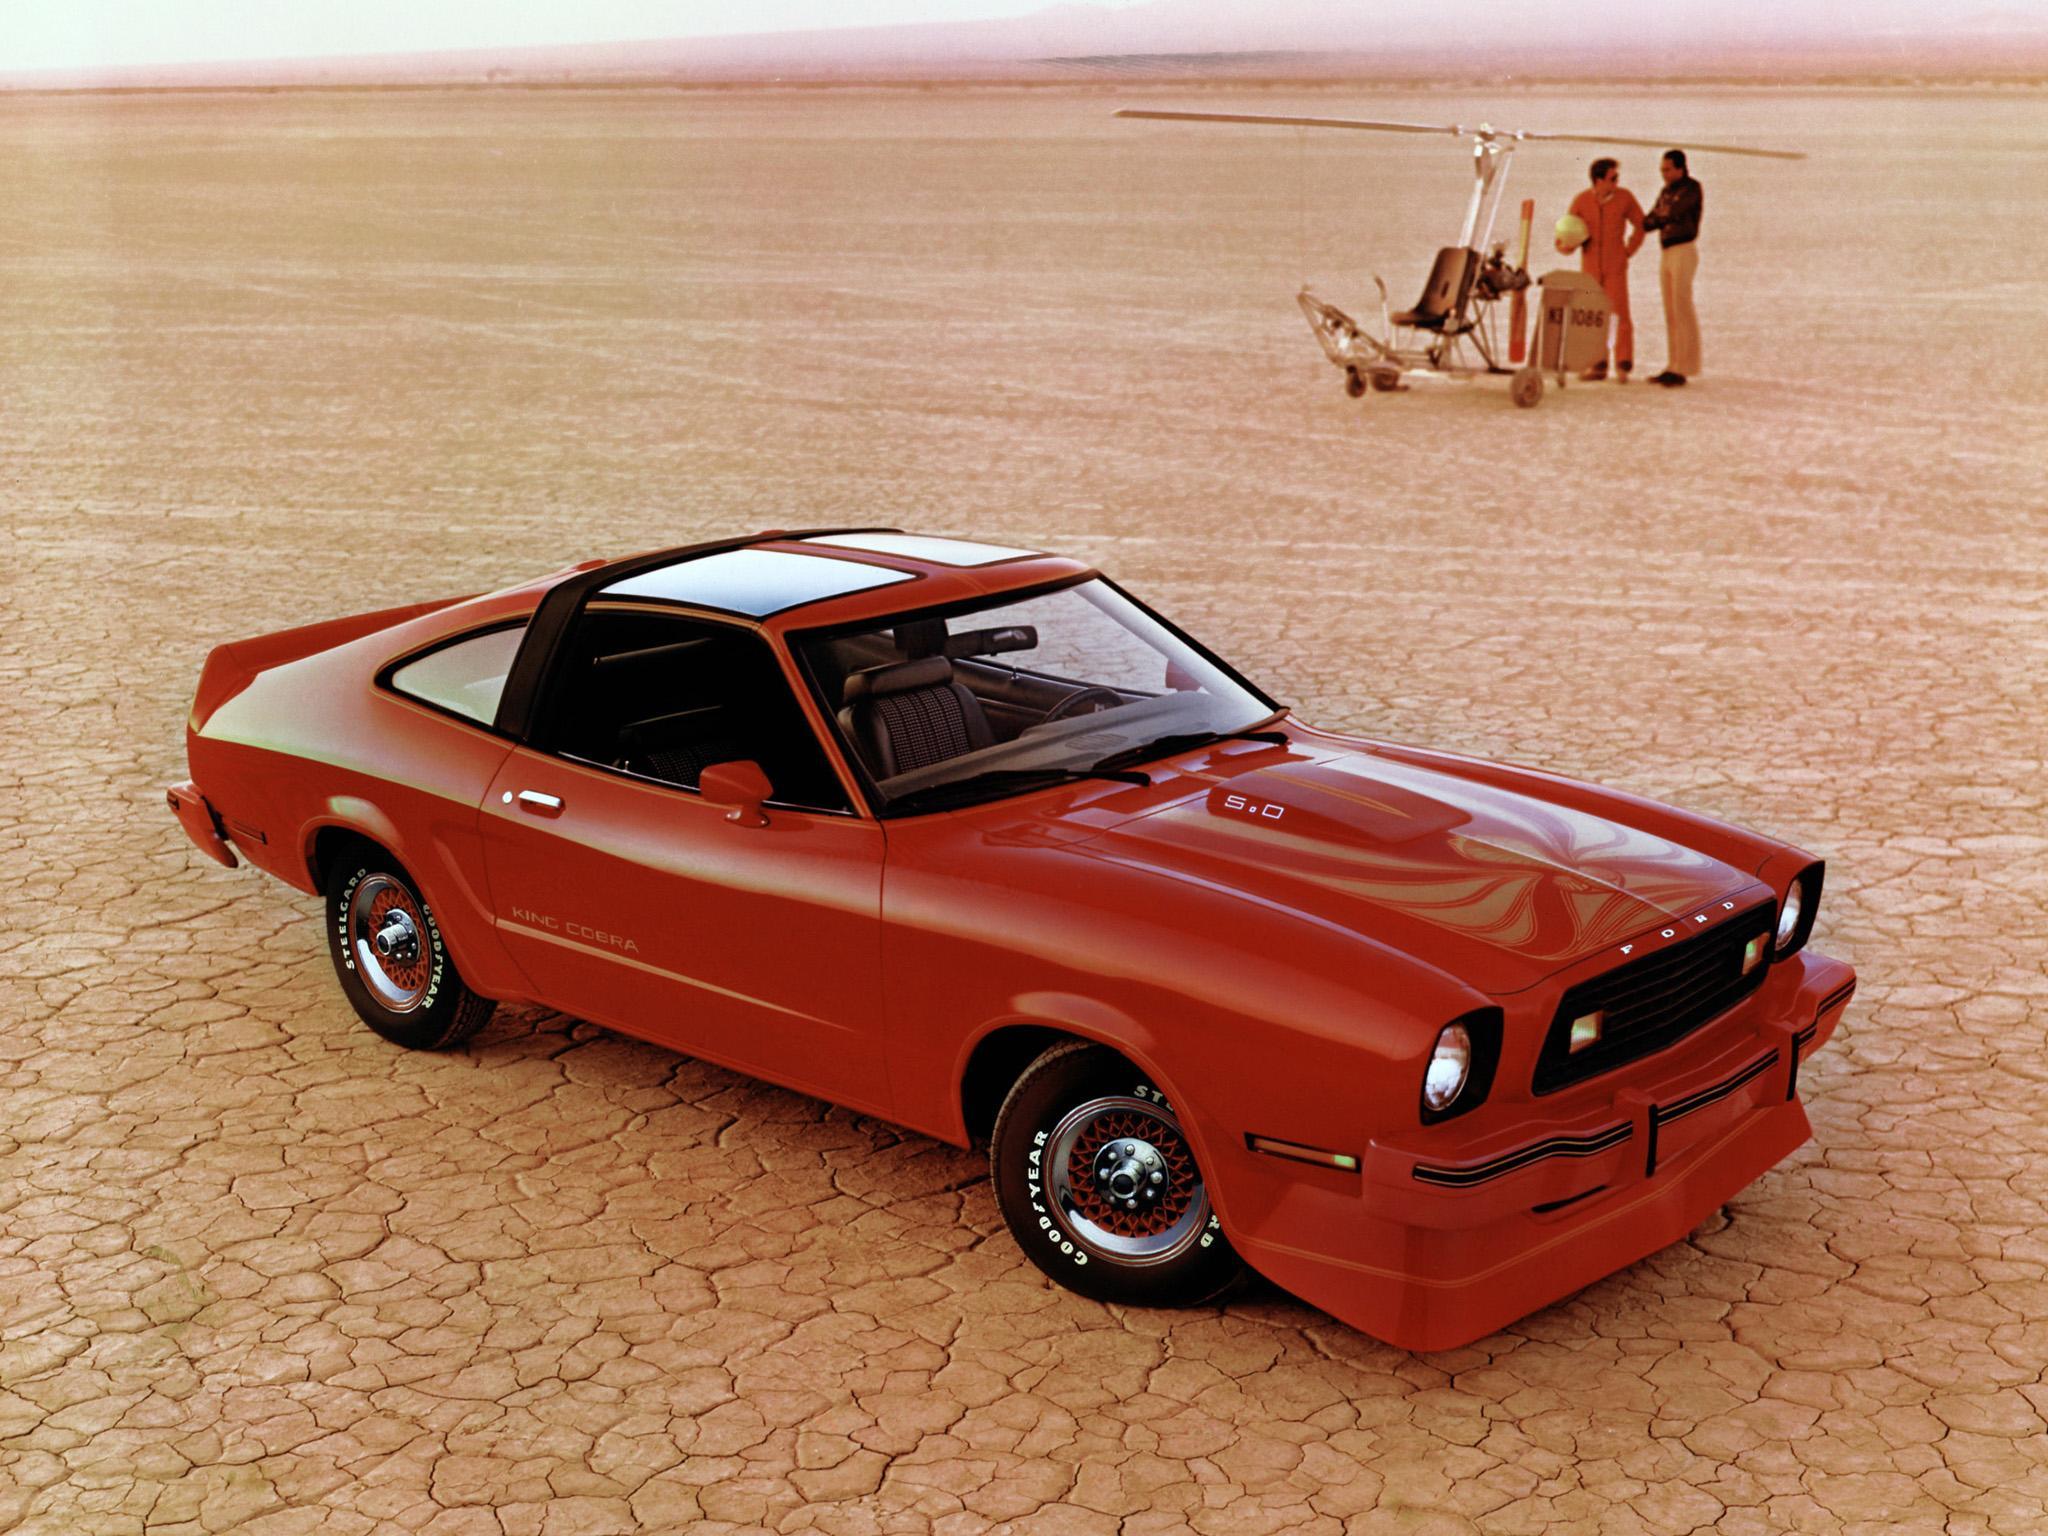 1978 Ford Mustang King Cobra T-roof - Ford Mustang Ii King Cobra 1978 Red - HD Wallpaper 